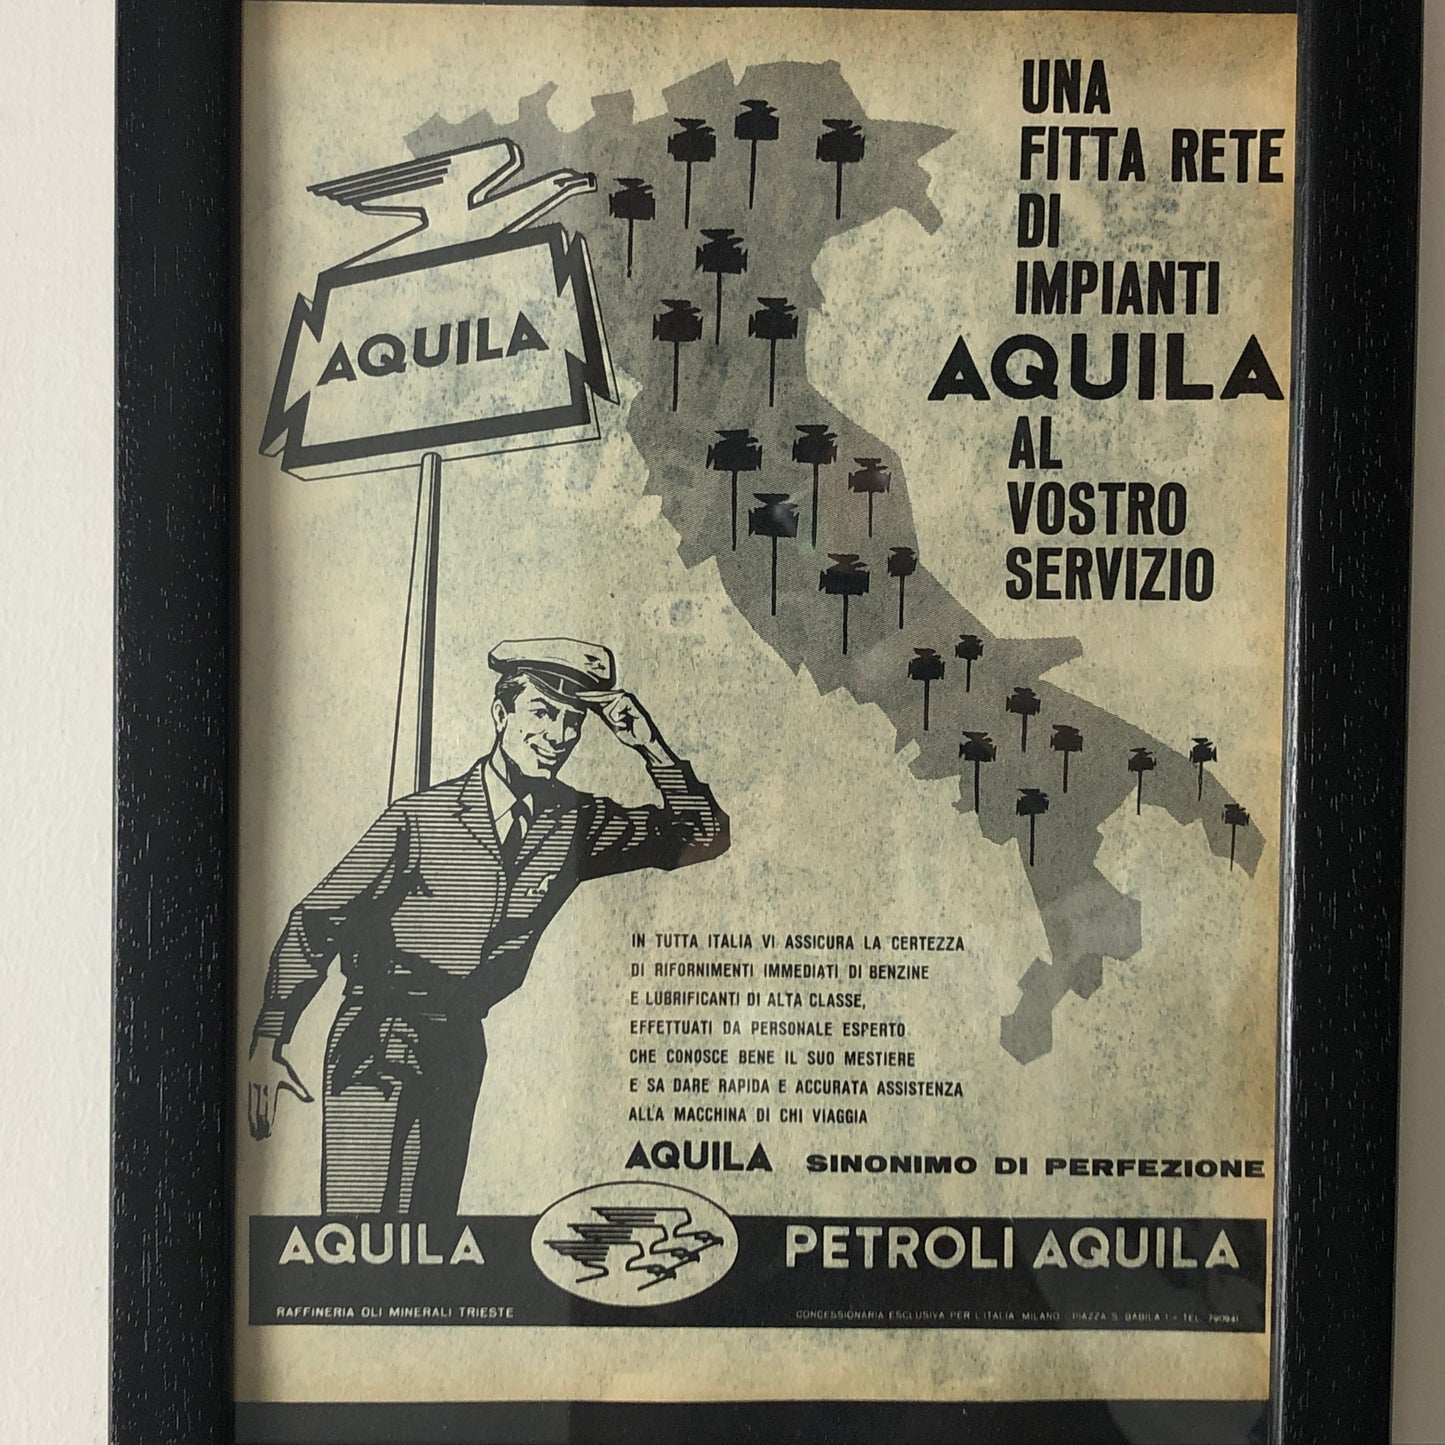 Aquila Mineral Oil Refinery Trieste, 1960 Advertising Petroli Aquila Plant Network in Italy